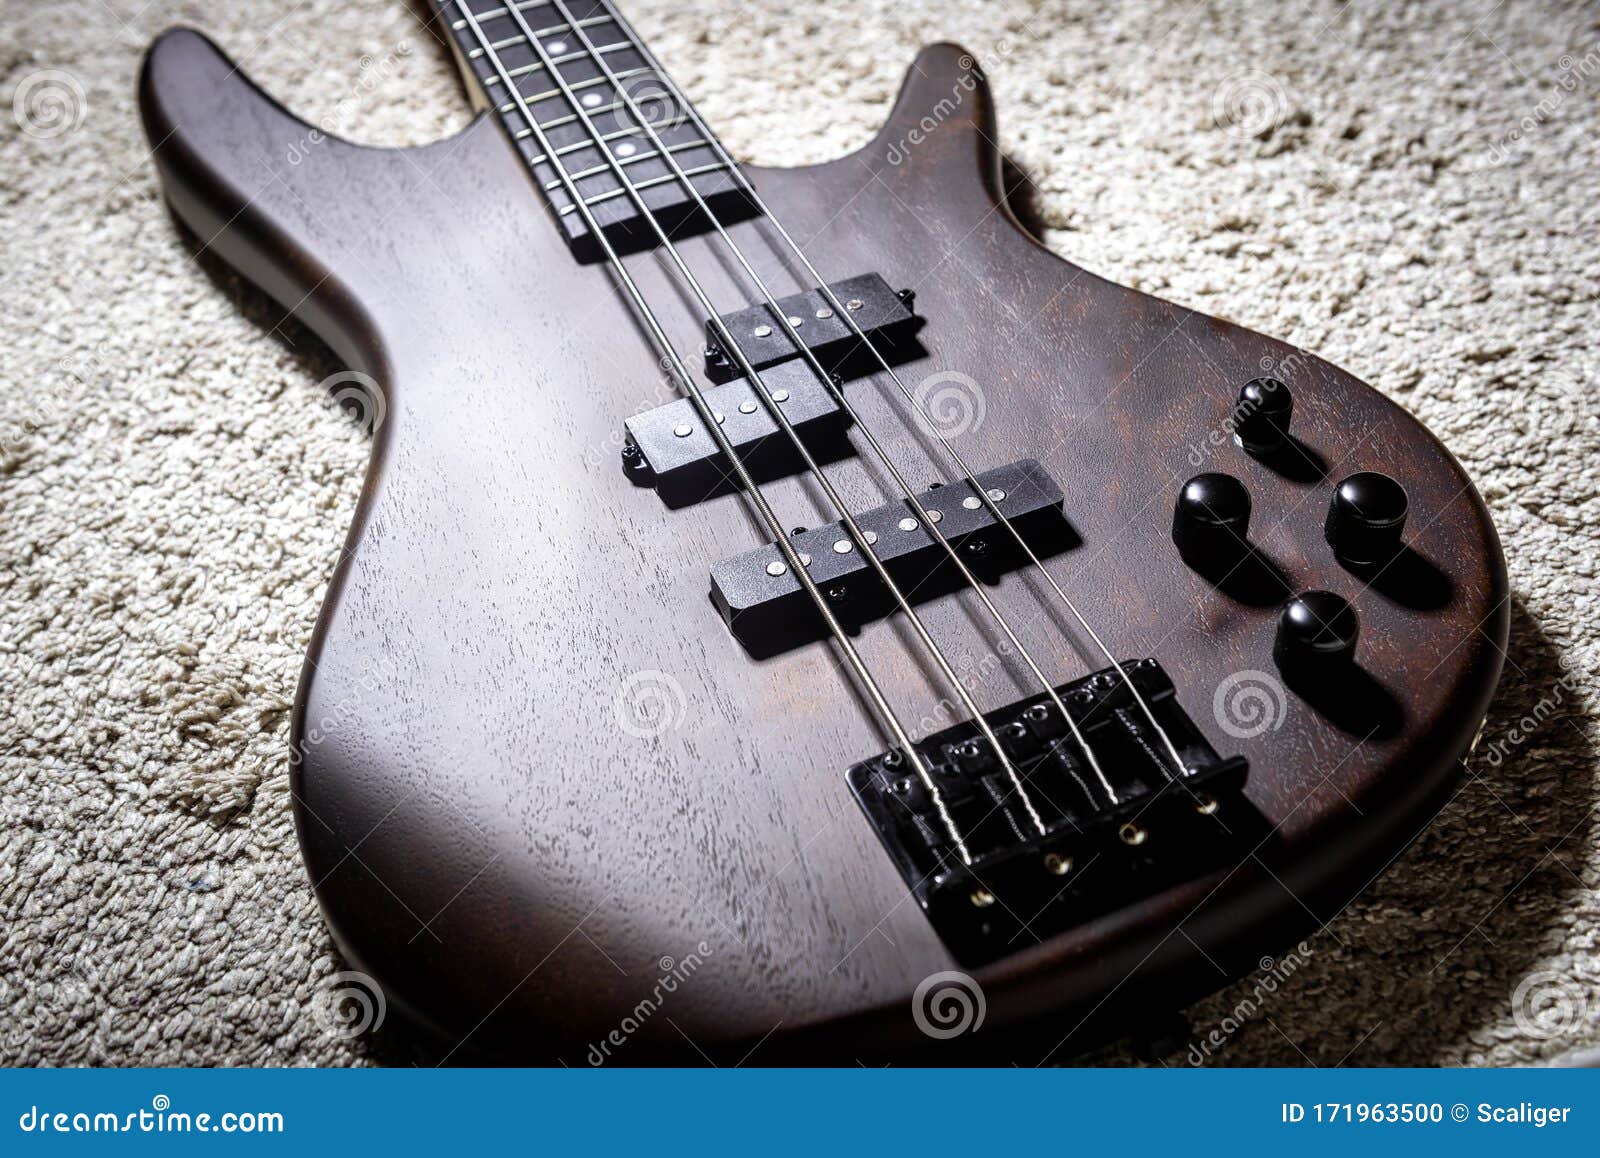 bass electric guitar with four strings. popular rock musical instrument. close view of brown bass on carpet